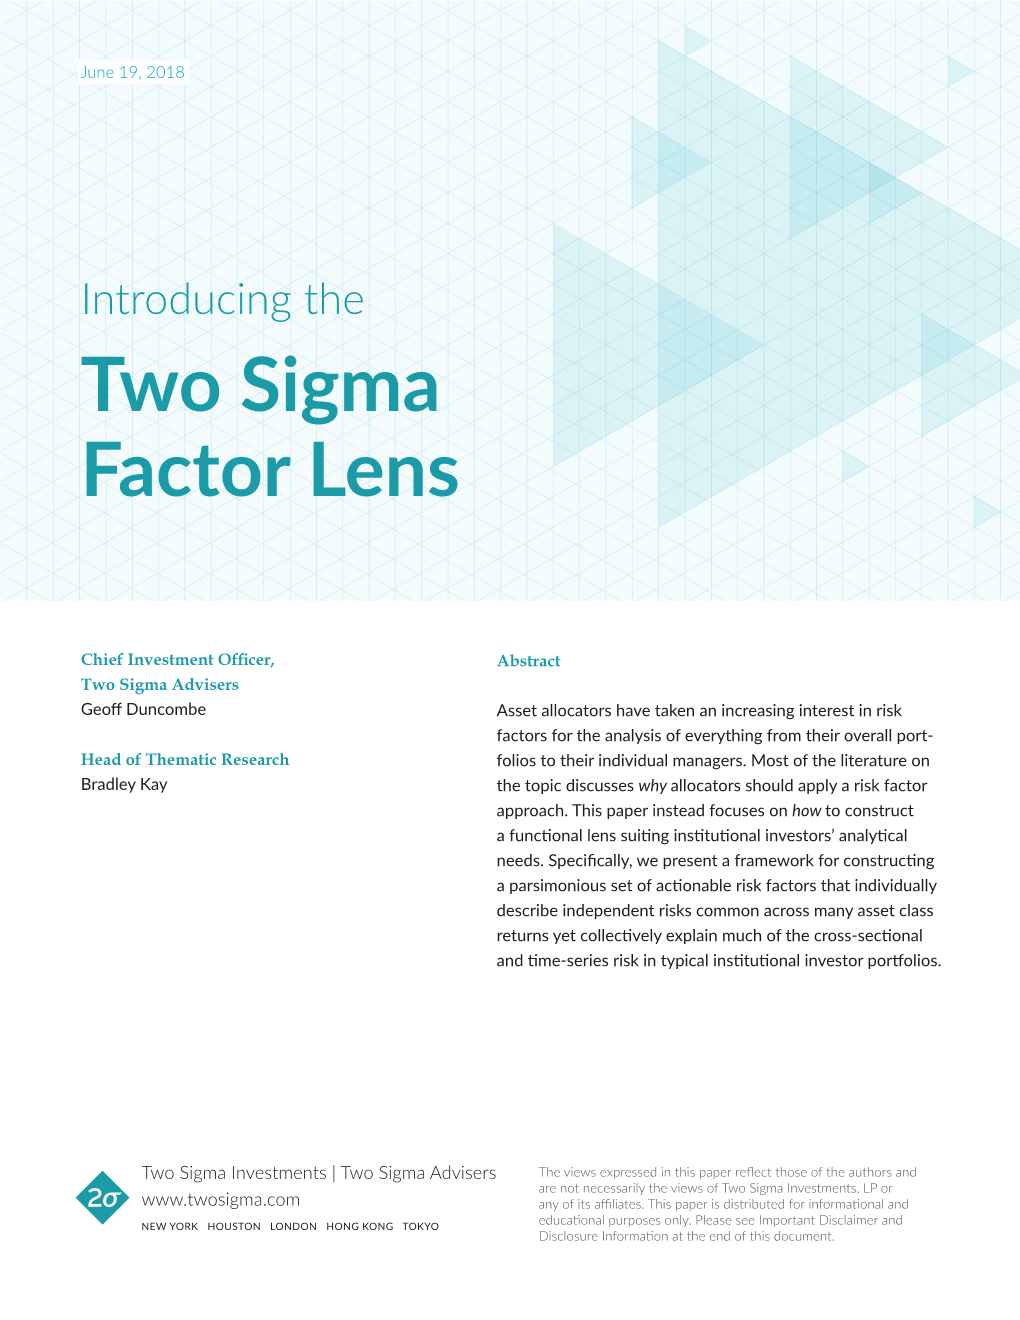 Two Sigma Factor Lens